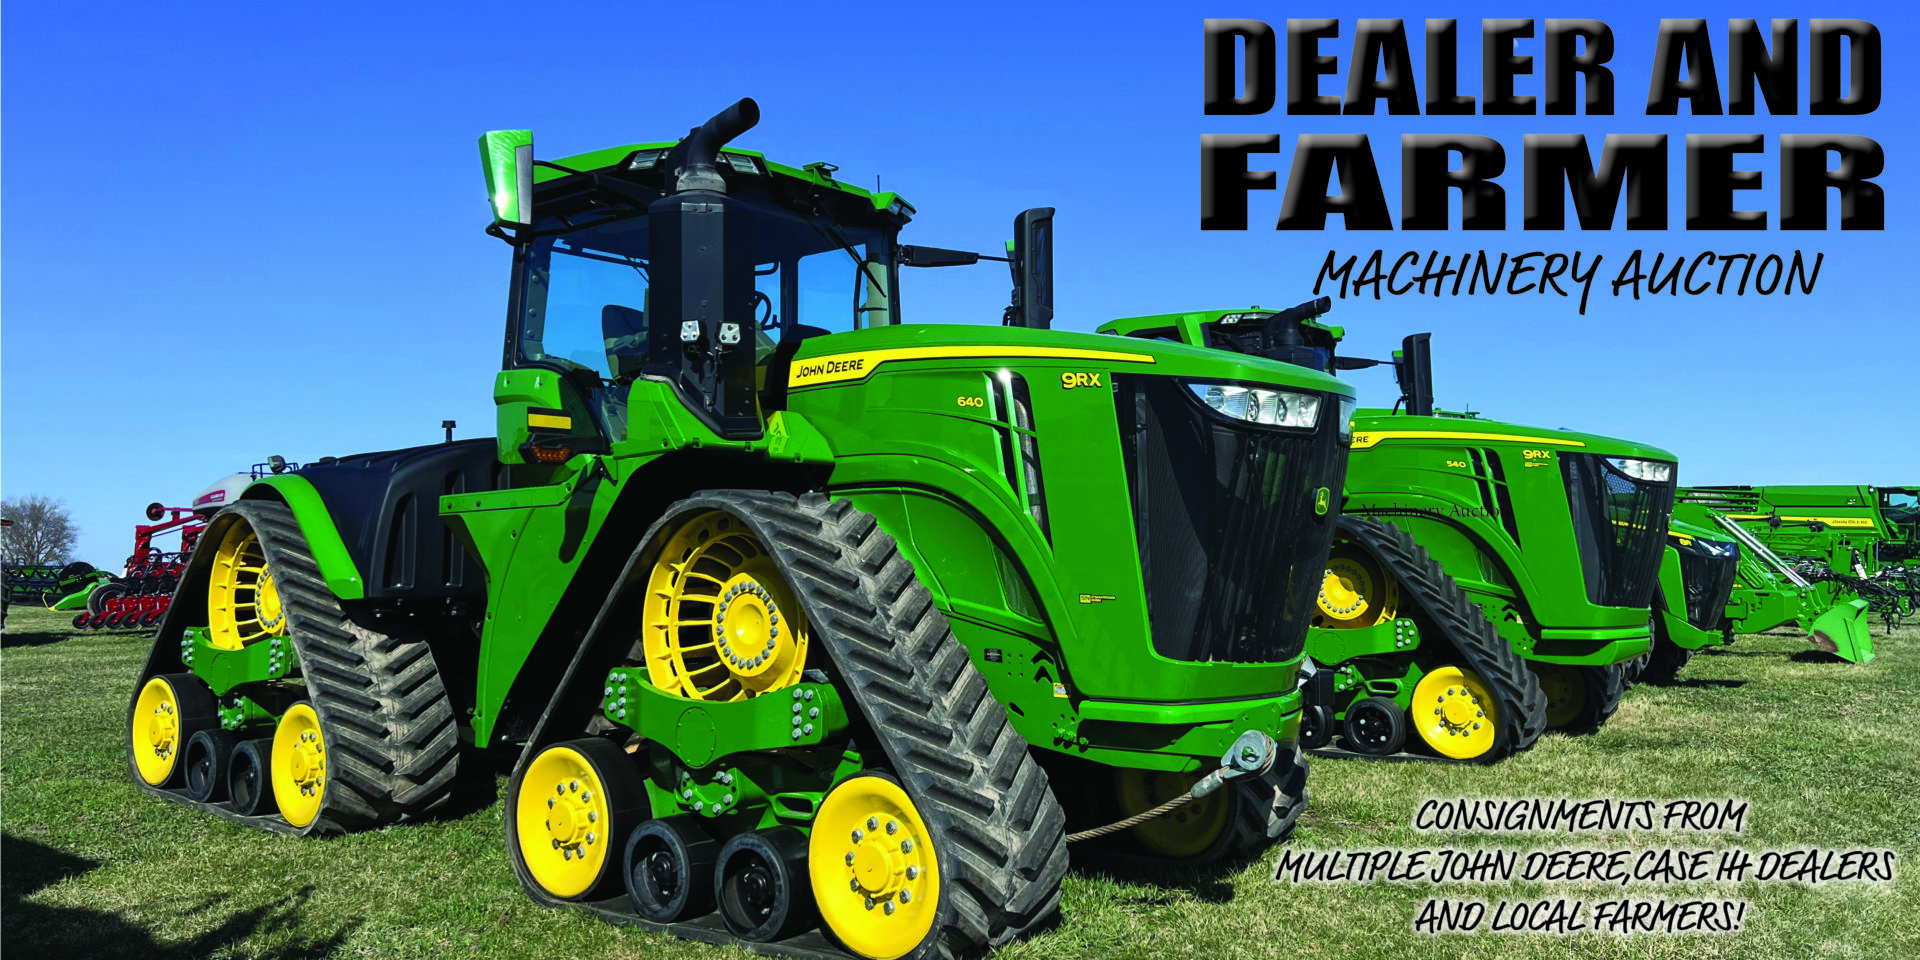 Dealer and Farmer Machinery Auction